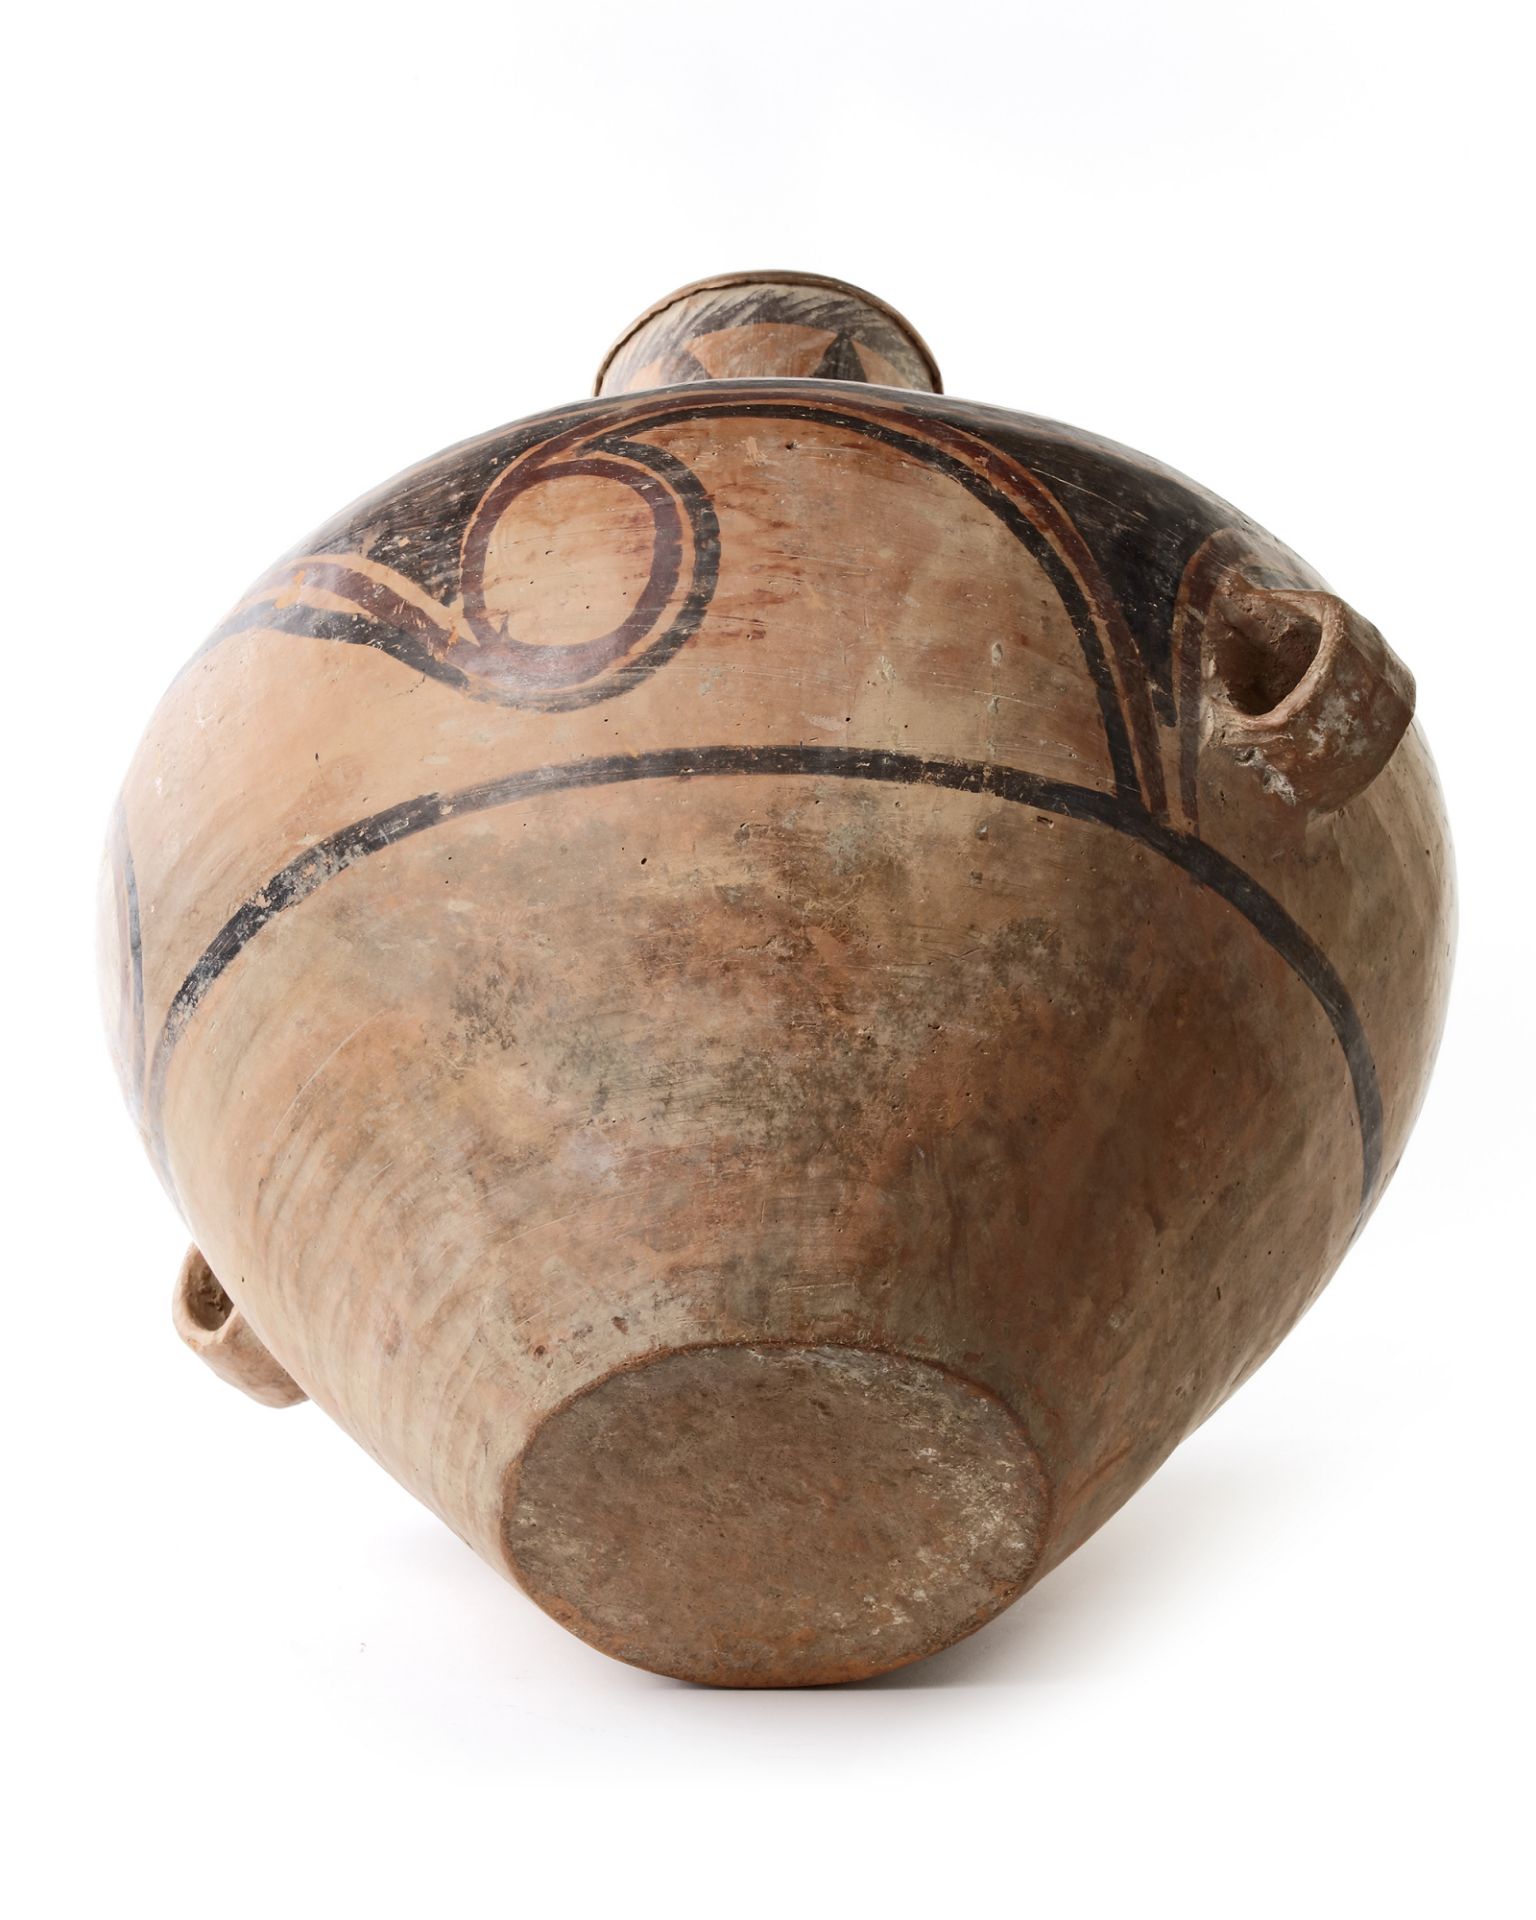 A CHINESE NEOLITHIC PAINTED POTTERY JAR, MAJIAYAO CULTURE, MID TO LATE 3RD MILLENIUM BC - Image 5 of 5